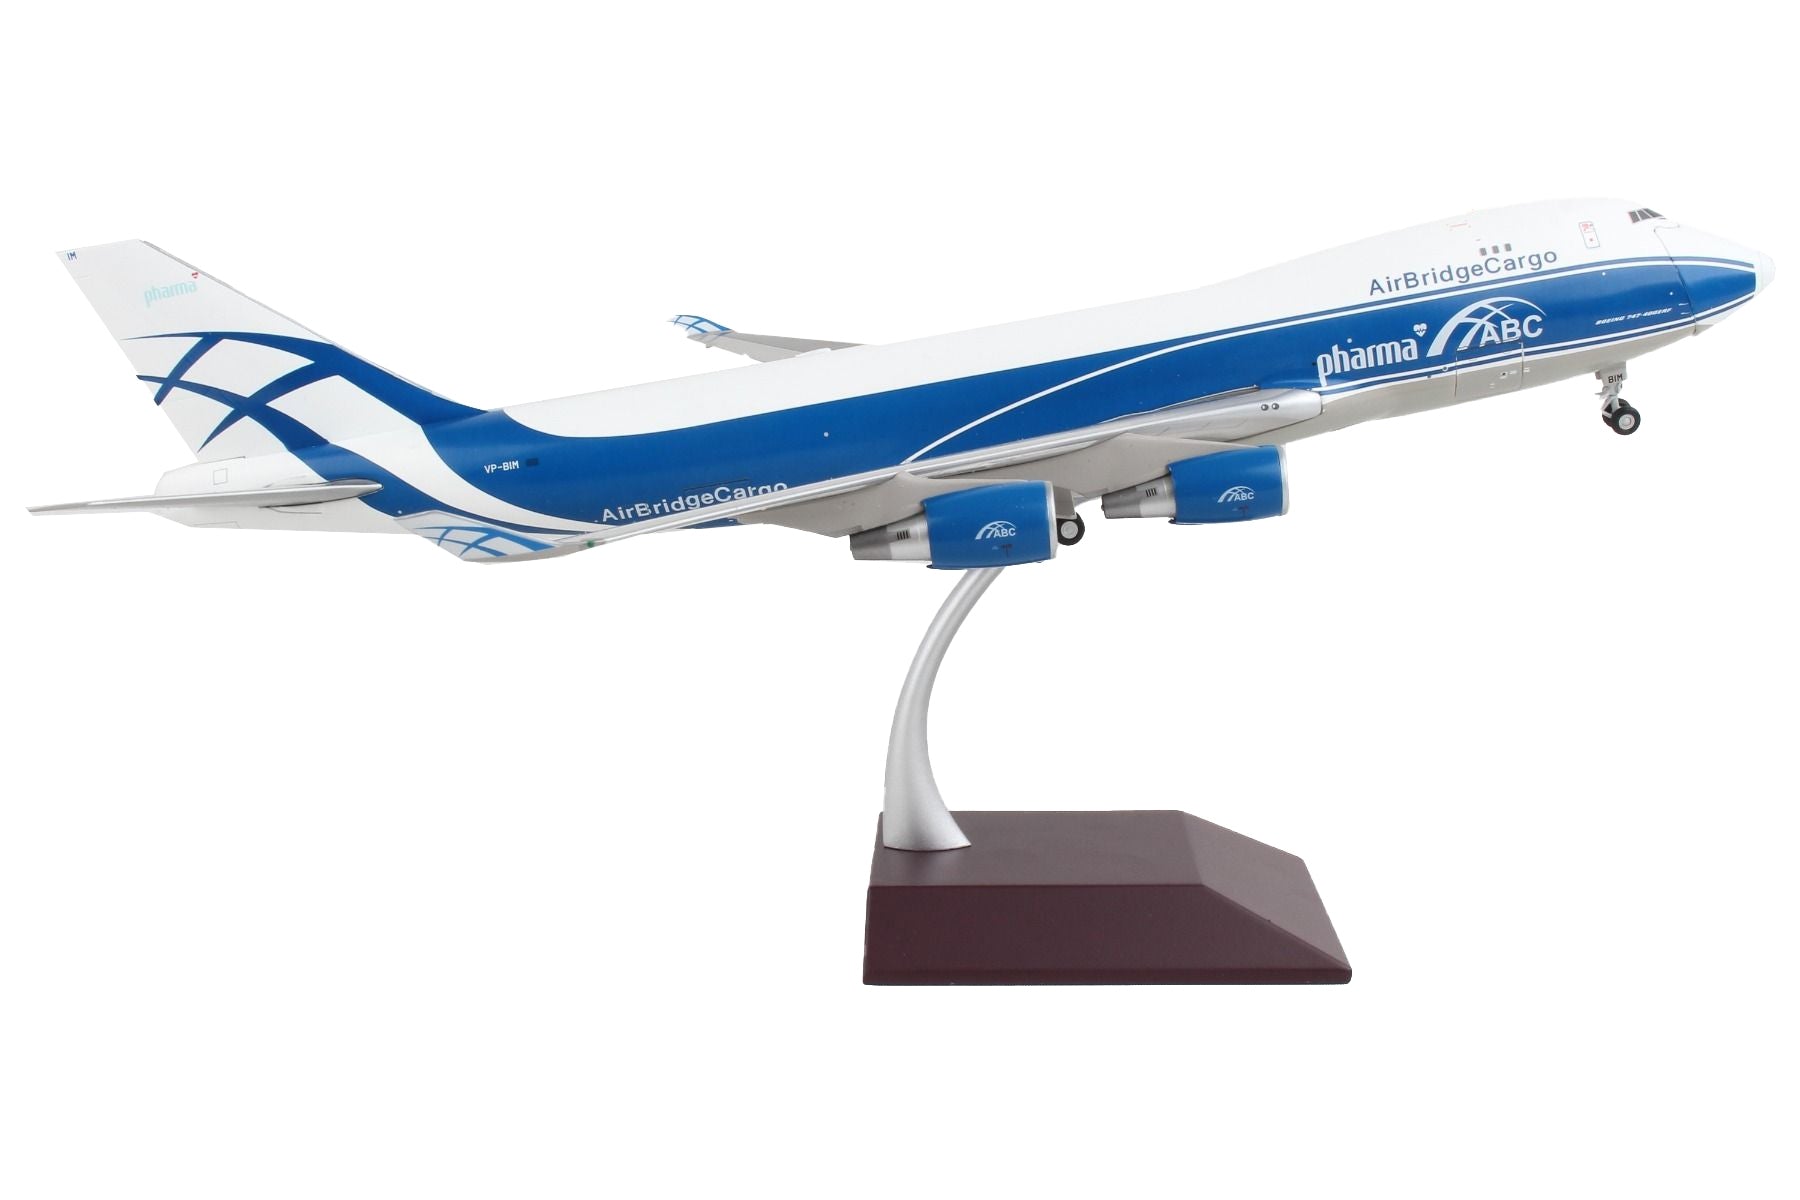 Boeing 747-400F Commercial Aircraft "AirBridgeCargo Airlines" White with Blue Stripes